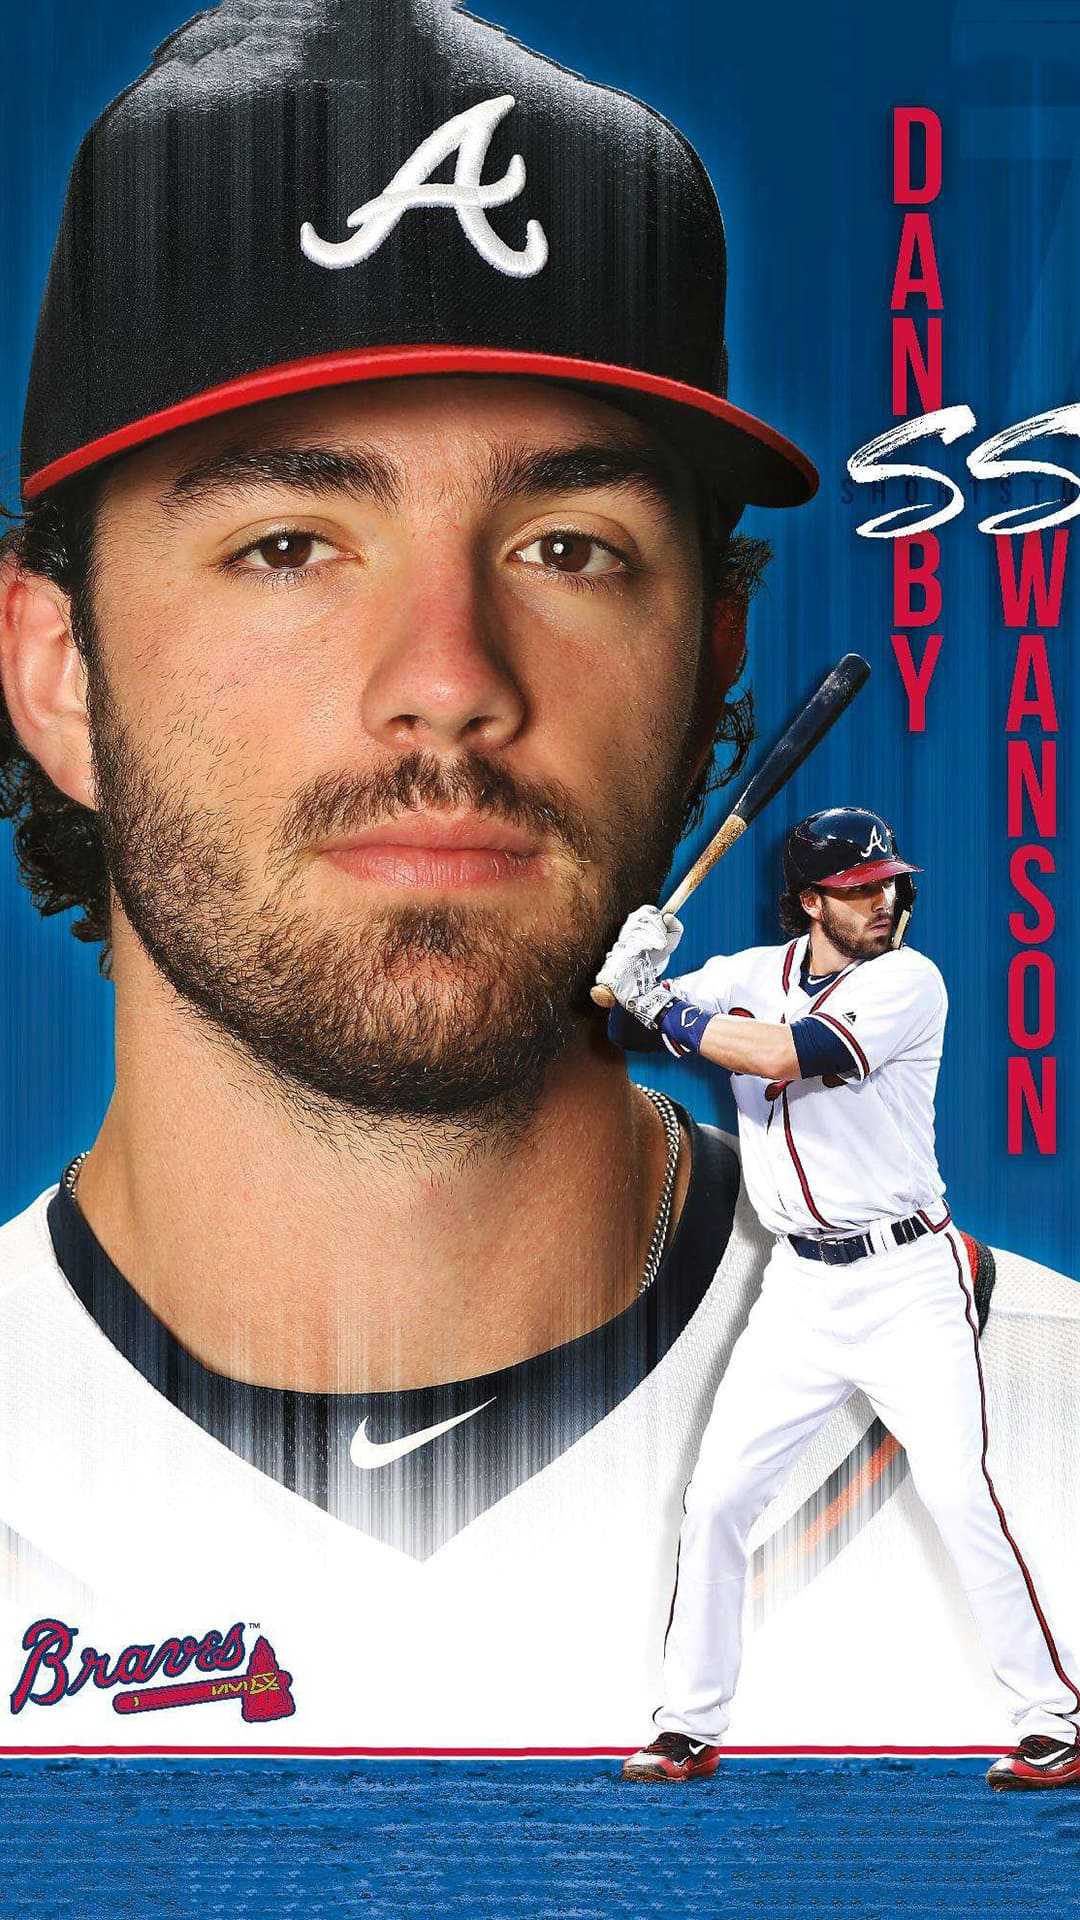 iPhone Dansby Swanson Wallpaper - iXpap